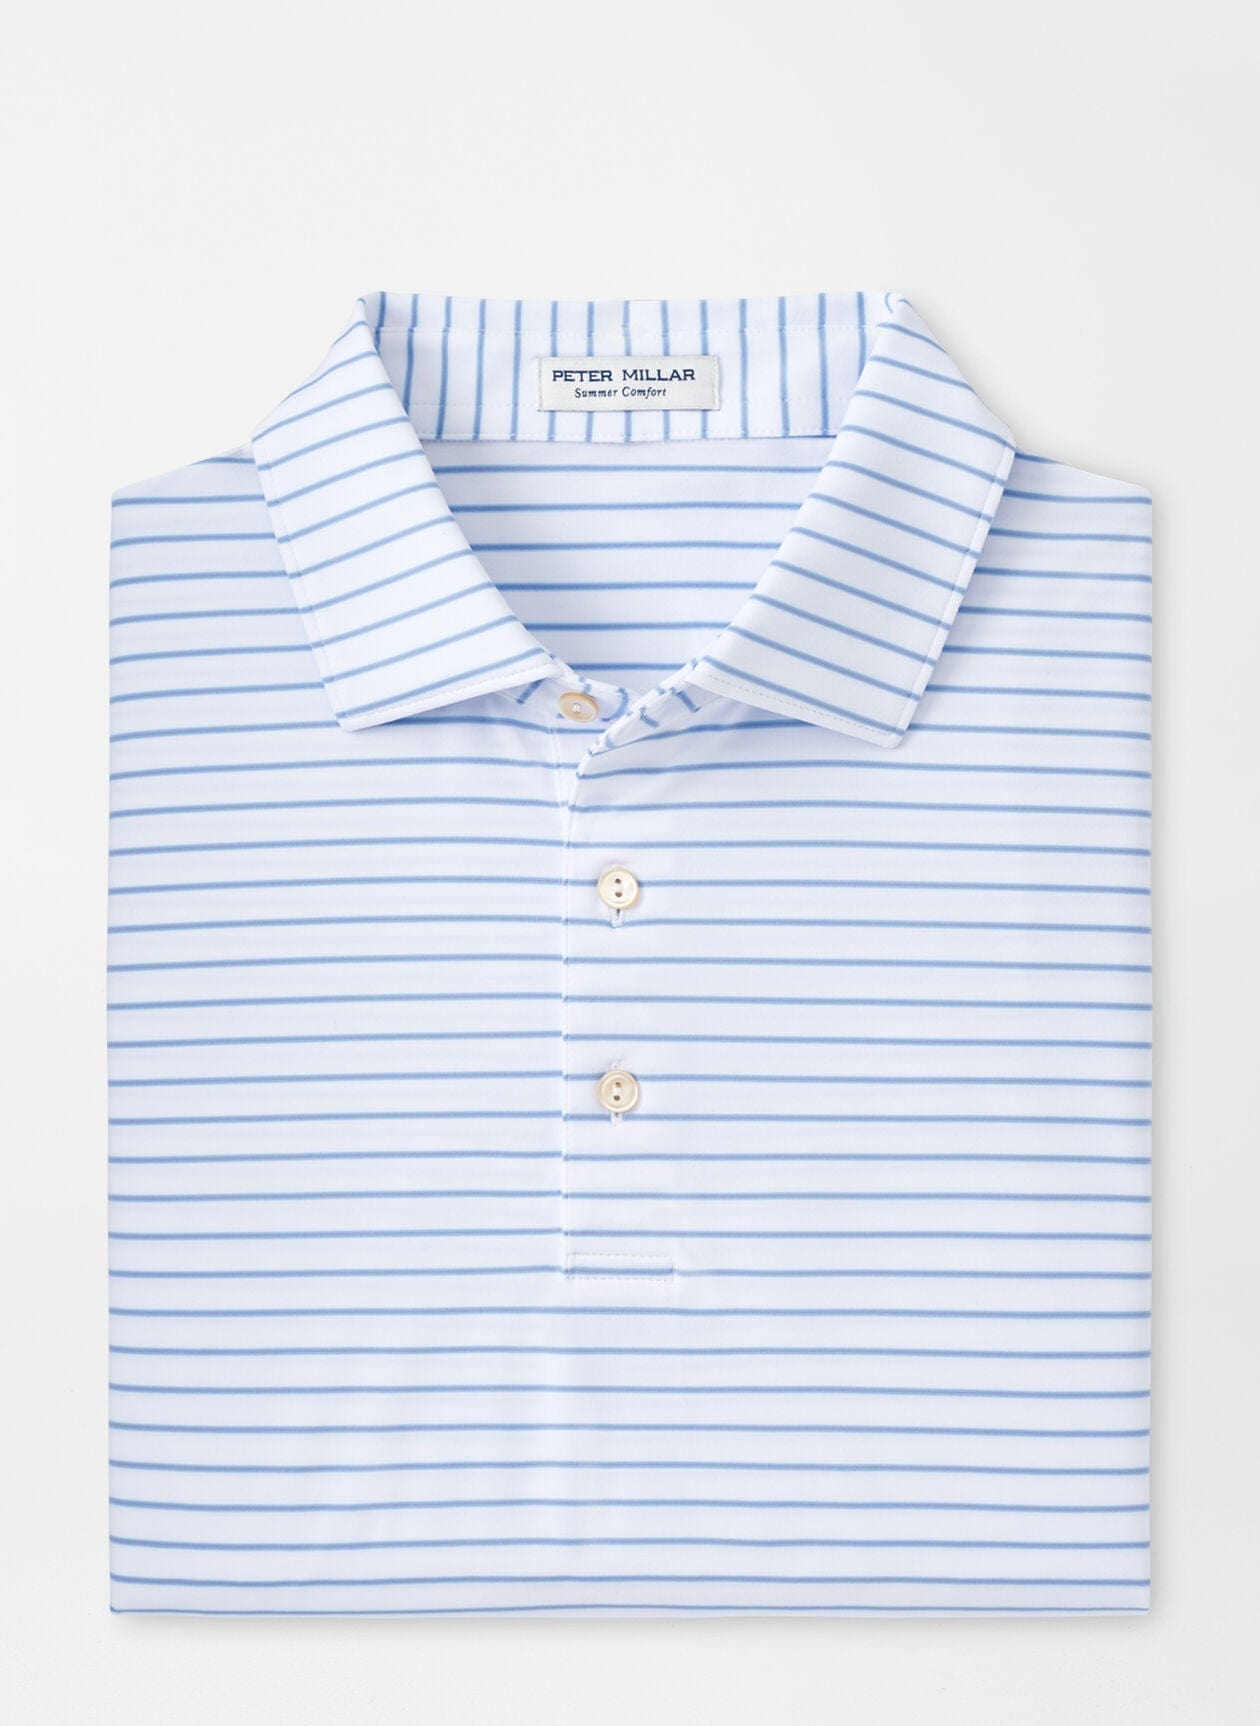 PETER MILLAR SHIRTS - POLO WHITE/BLUE / M DRUM PERFORMANCE JERSEY POLO